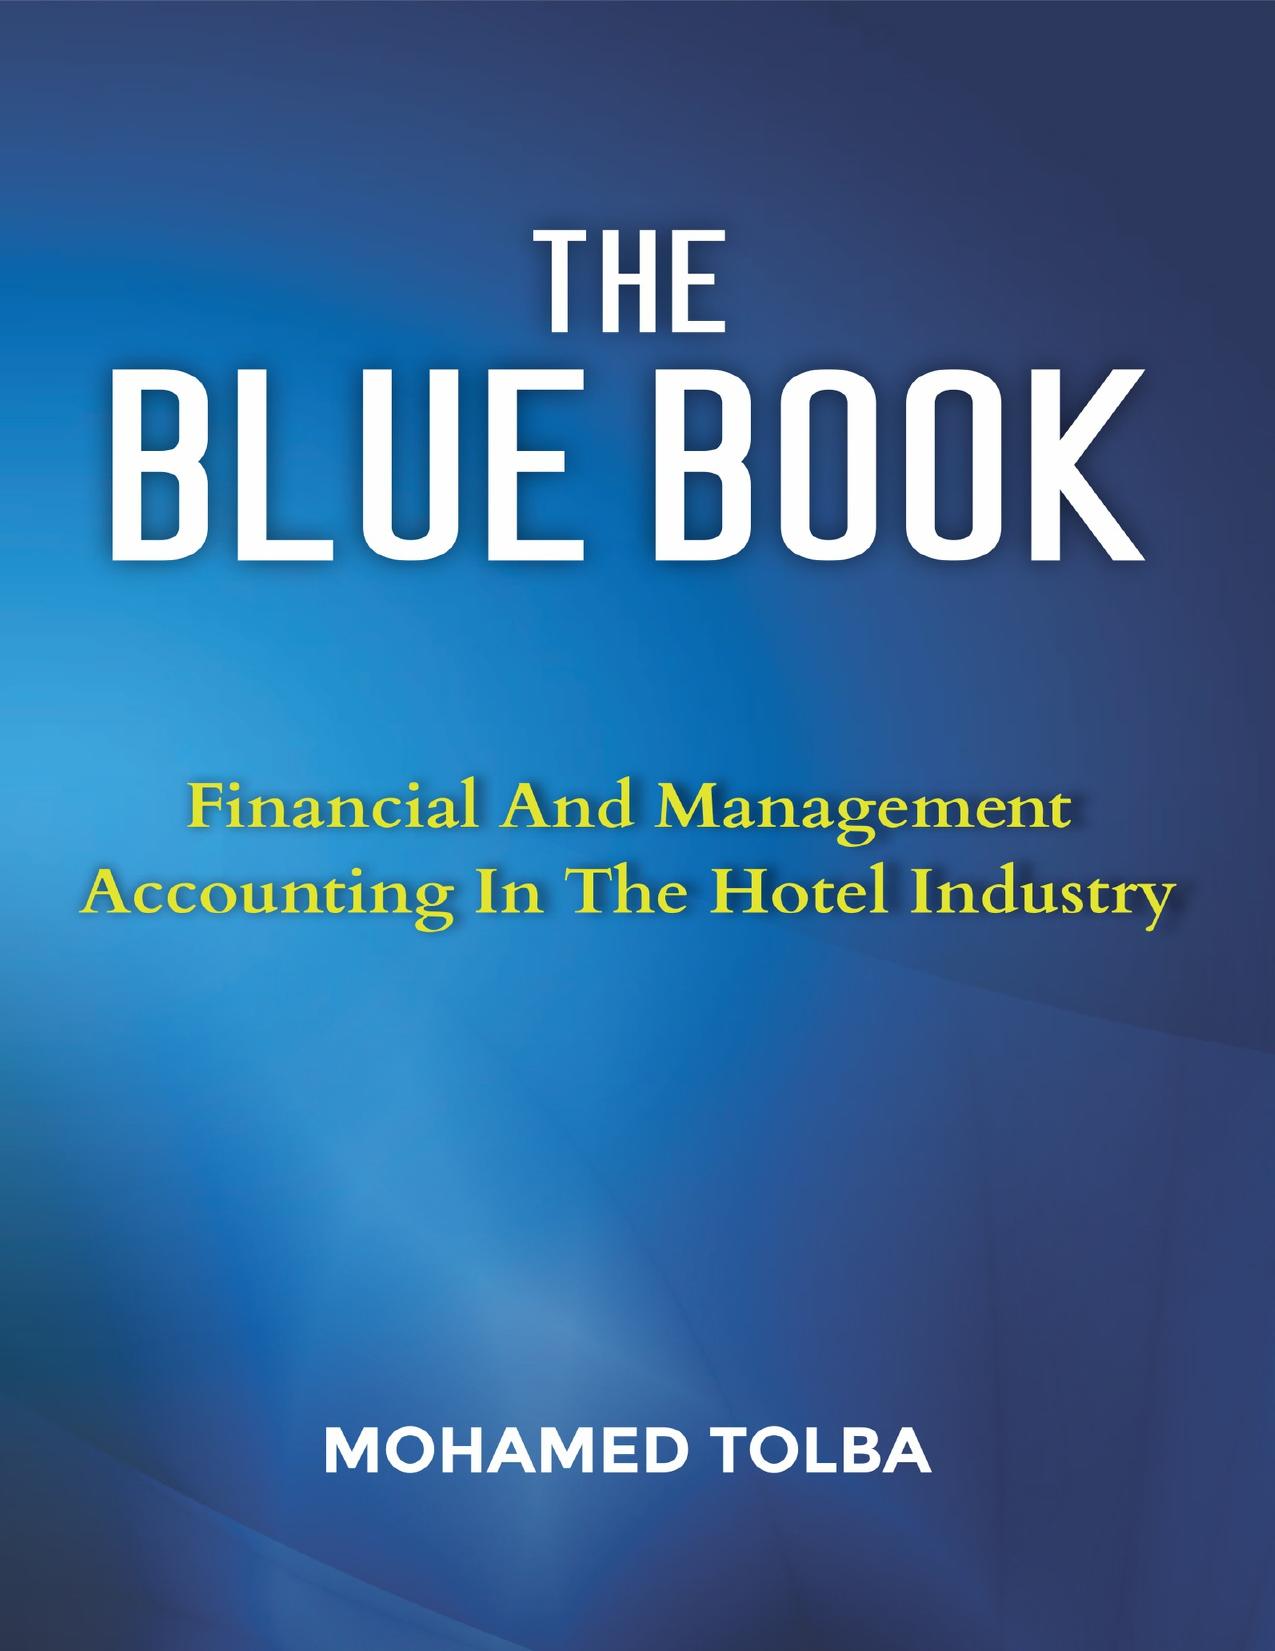 THE BLUE BOOK: FINANCIAL AND MANAGEMENT ACCOUNTING IN THE HOTEL INDUSTRY by Tolba Mohamed